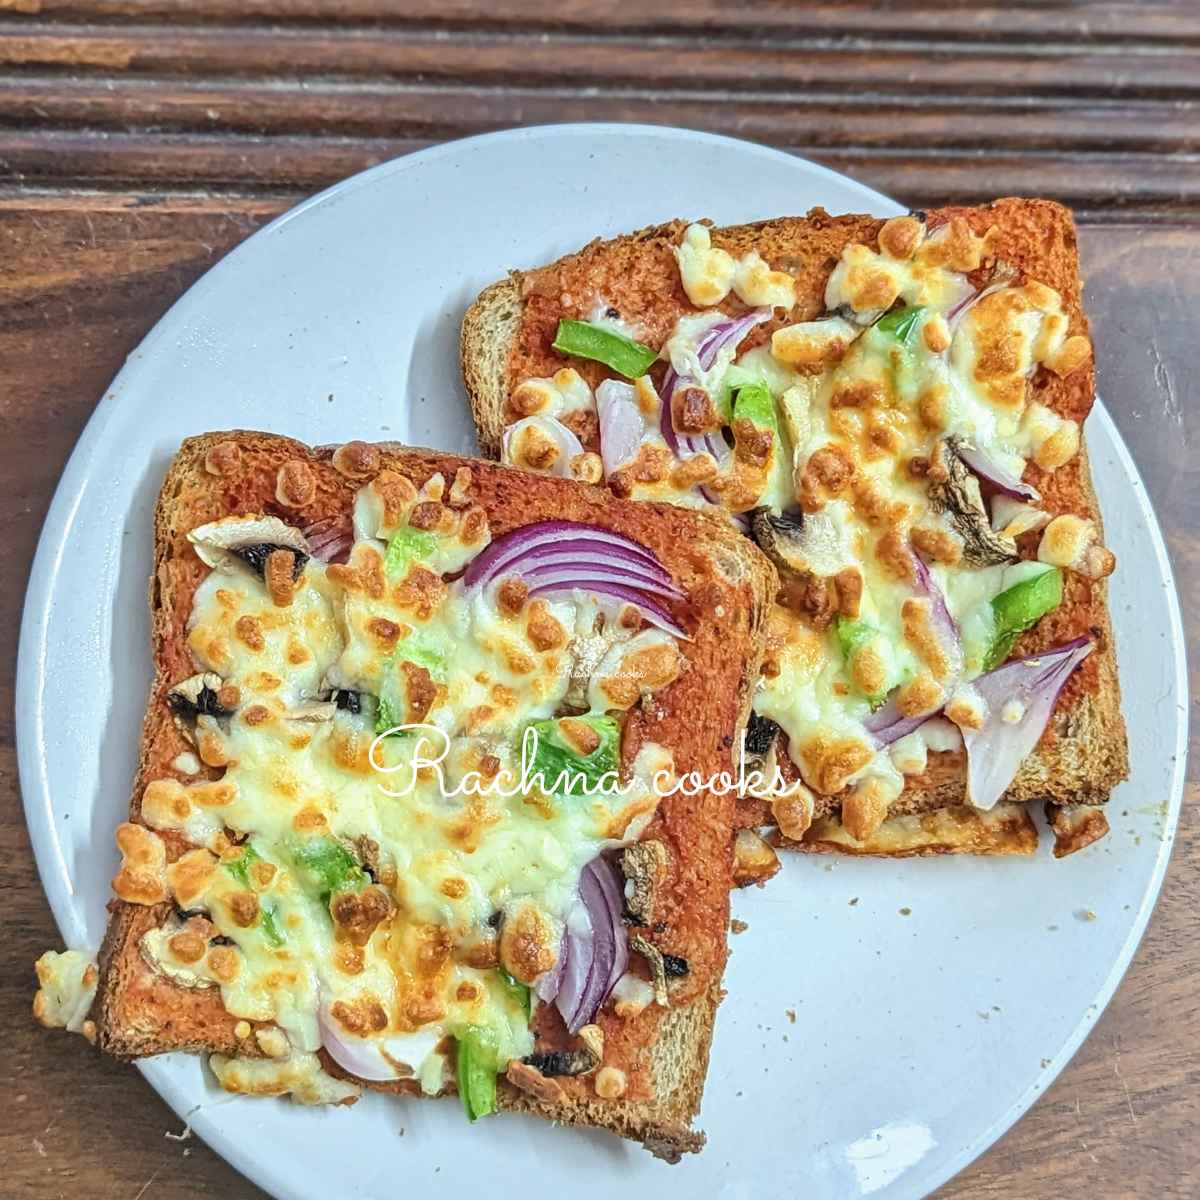 2 slices of bread pizza in a white plate.